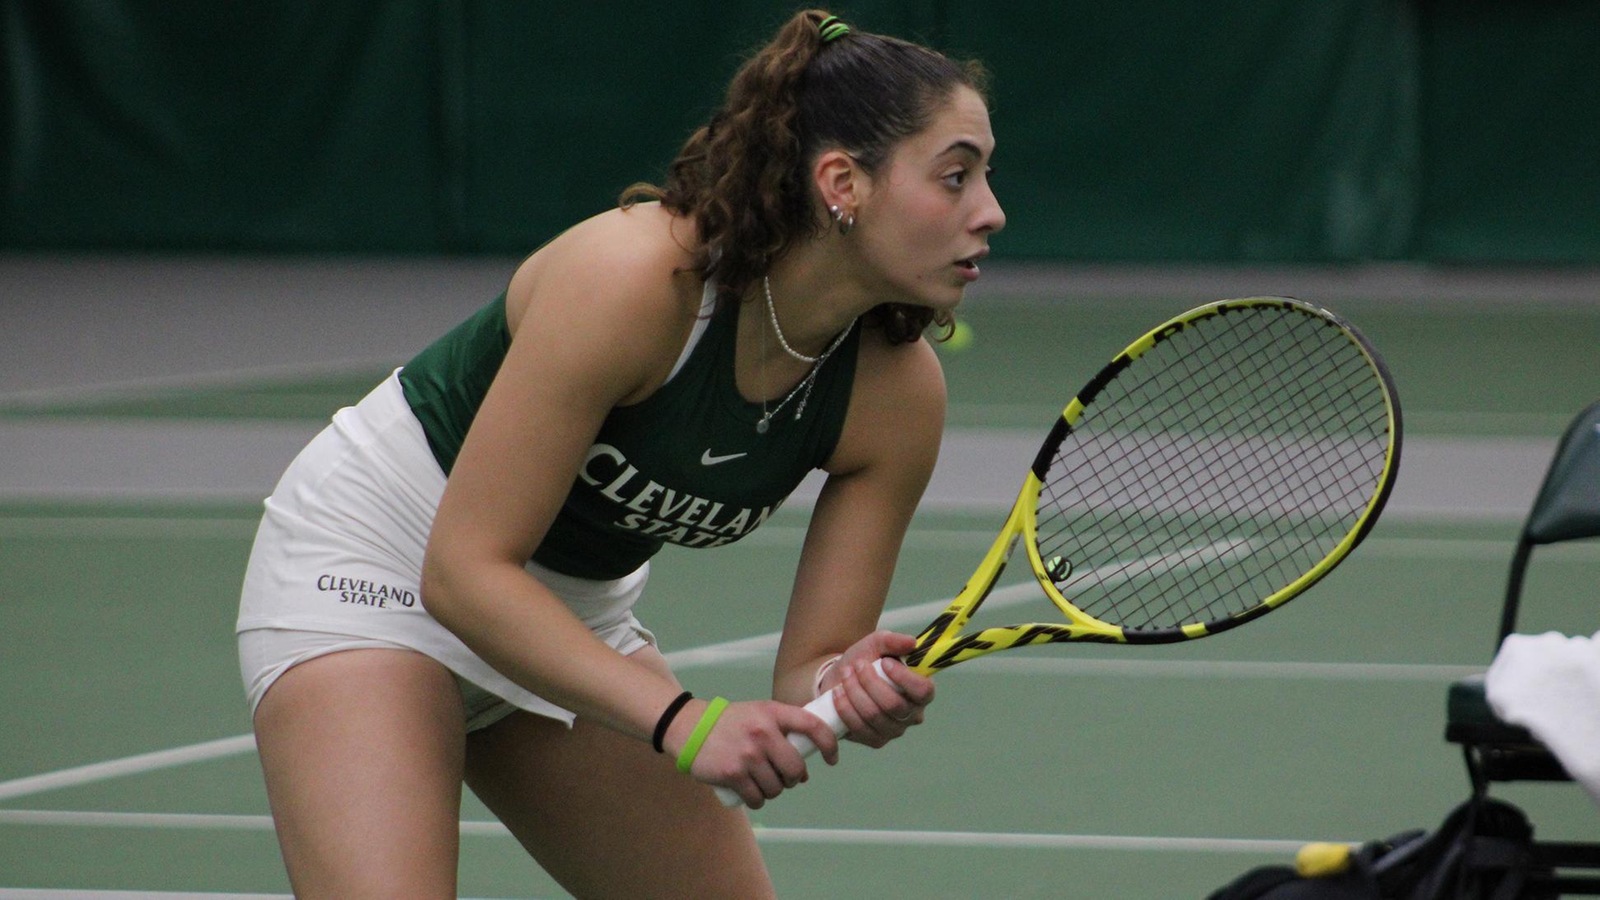 Cleveland State Women’s Tennis Remains Perfect In #HLTennis Play With 7-0 Victory Over Milwaukee